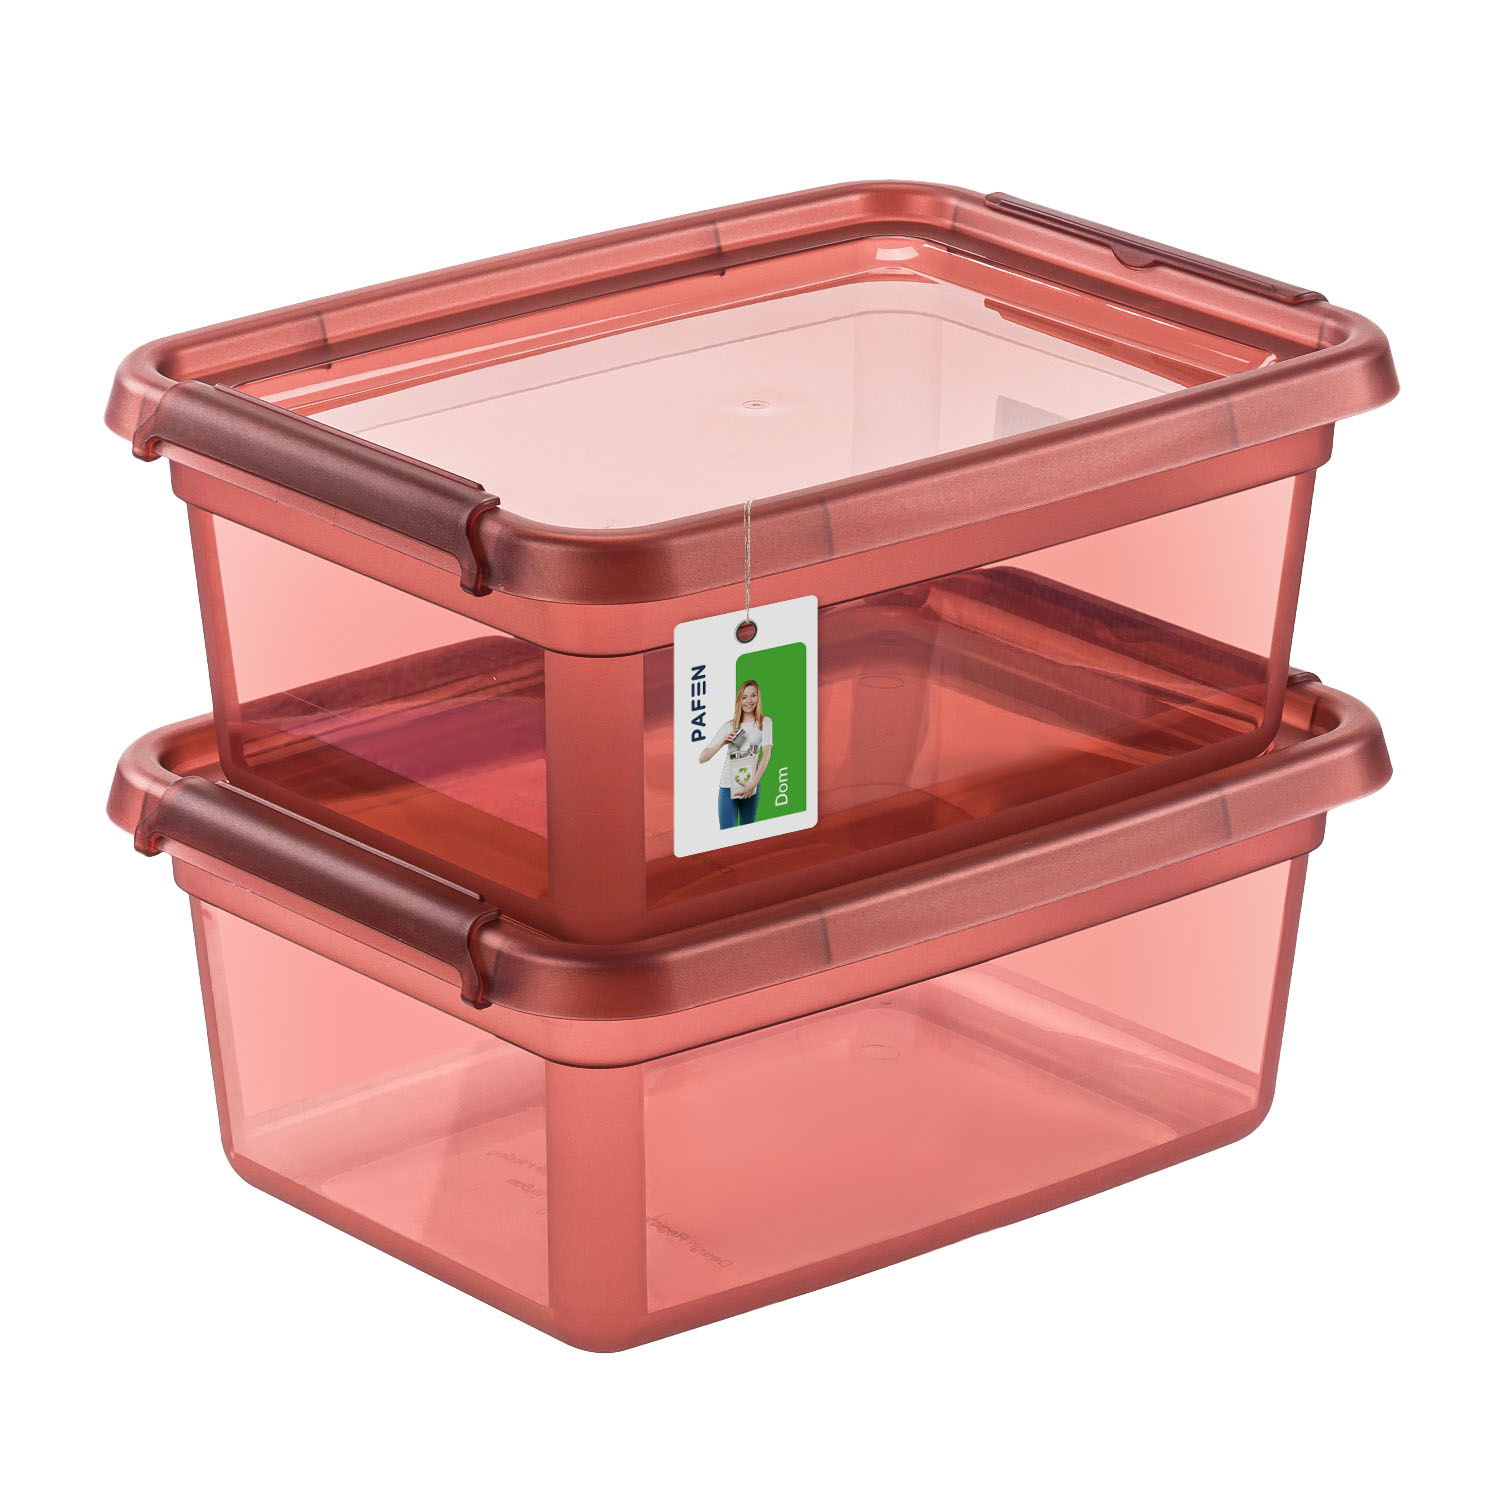 BaseStore Color 2522 Transparent maroon storage container set